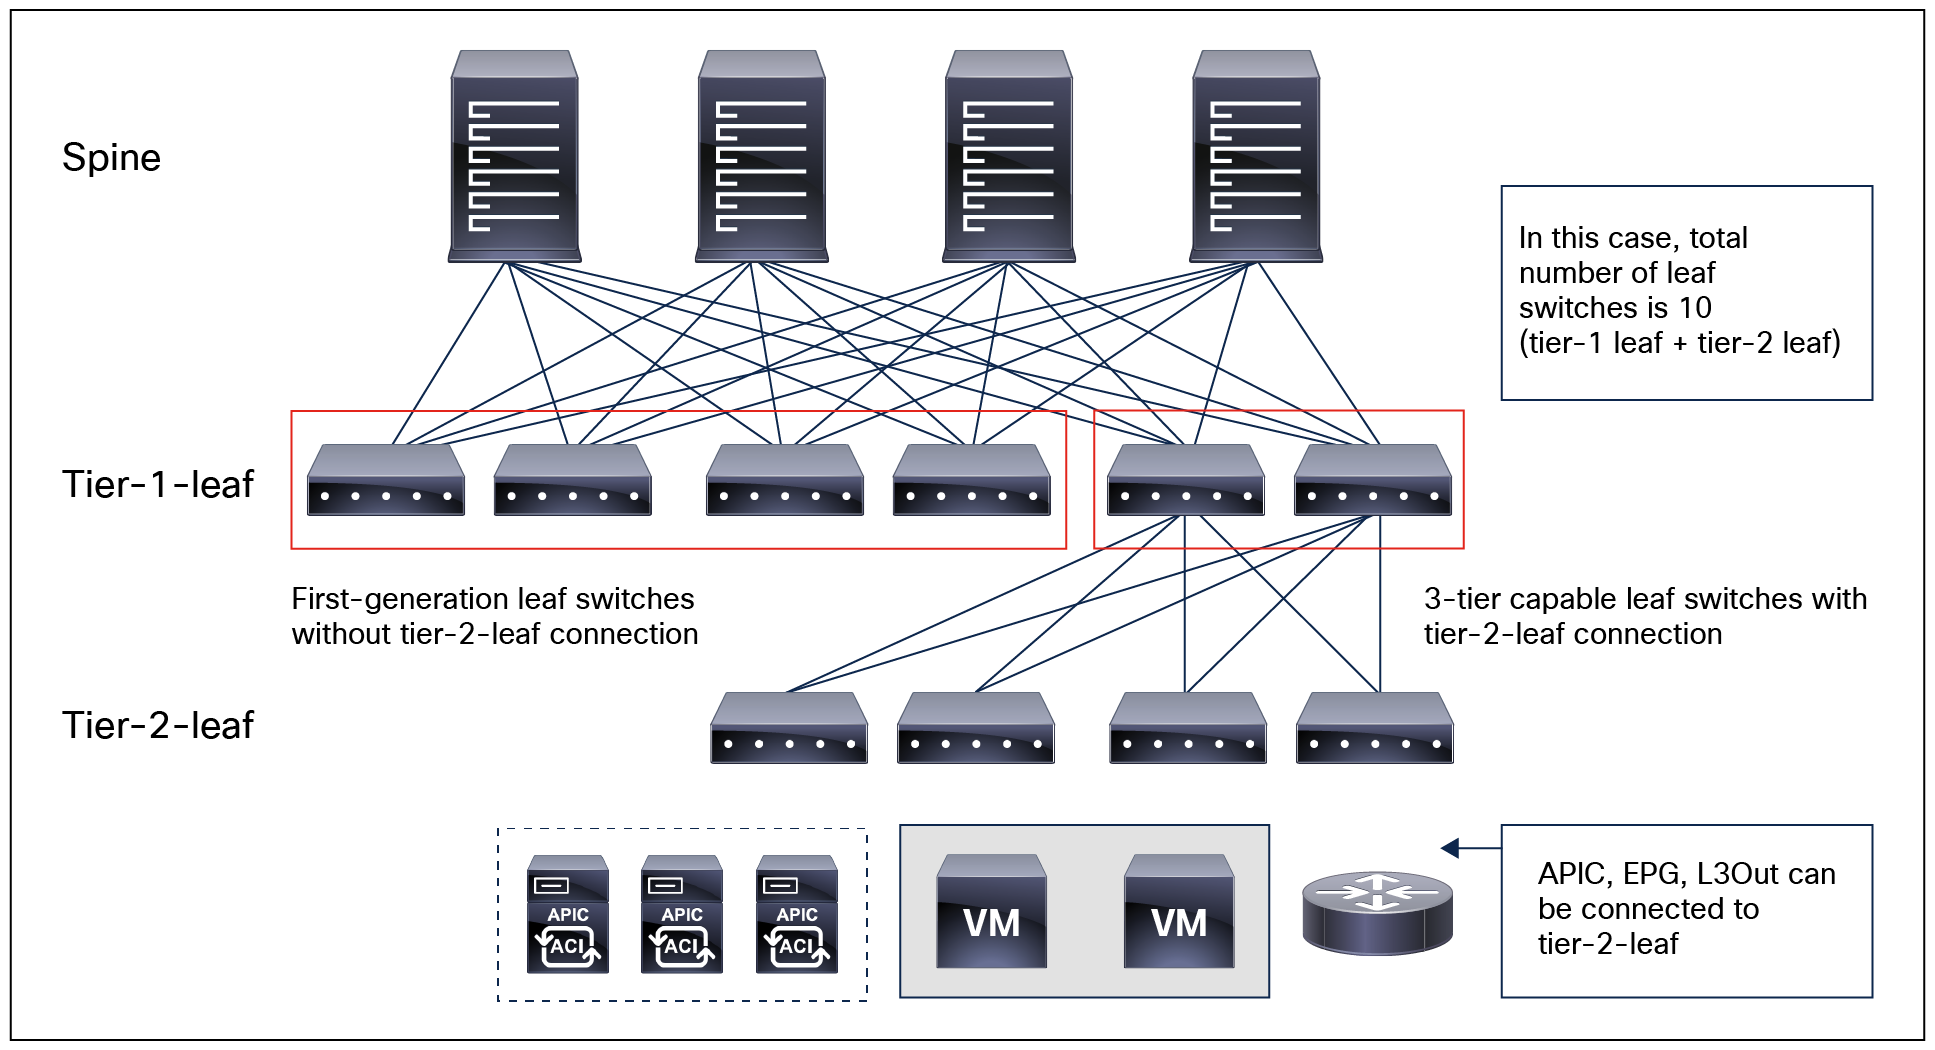 Cisco ACI multi-tier architecture (spine, tier-1 leaf, and tier-2 leaf) topology consideration